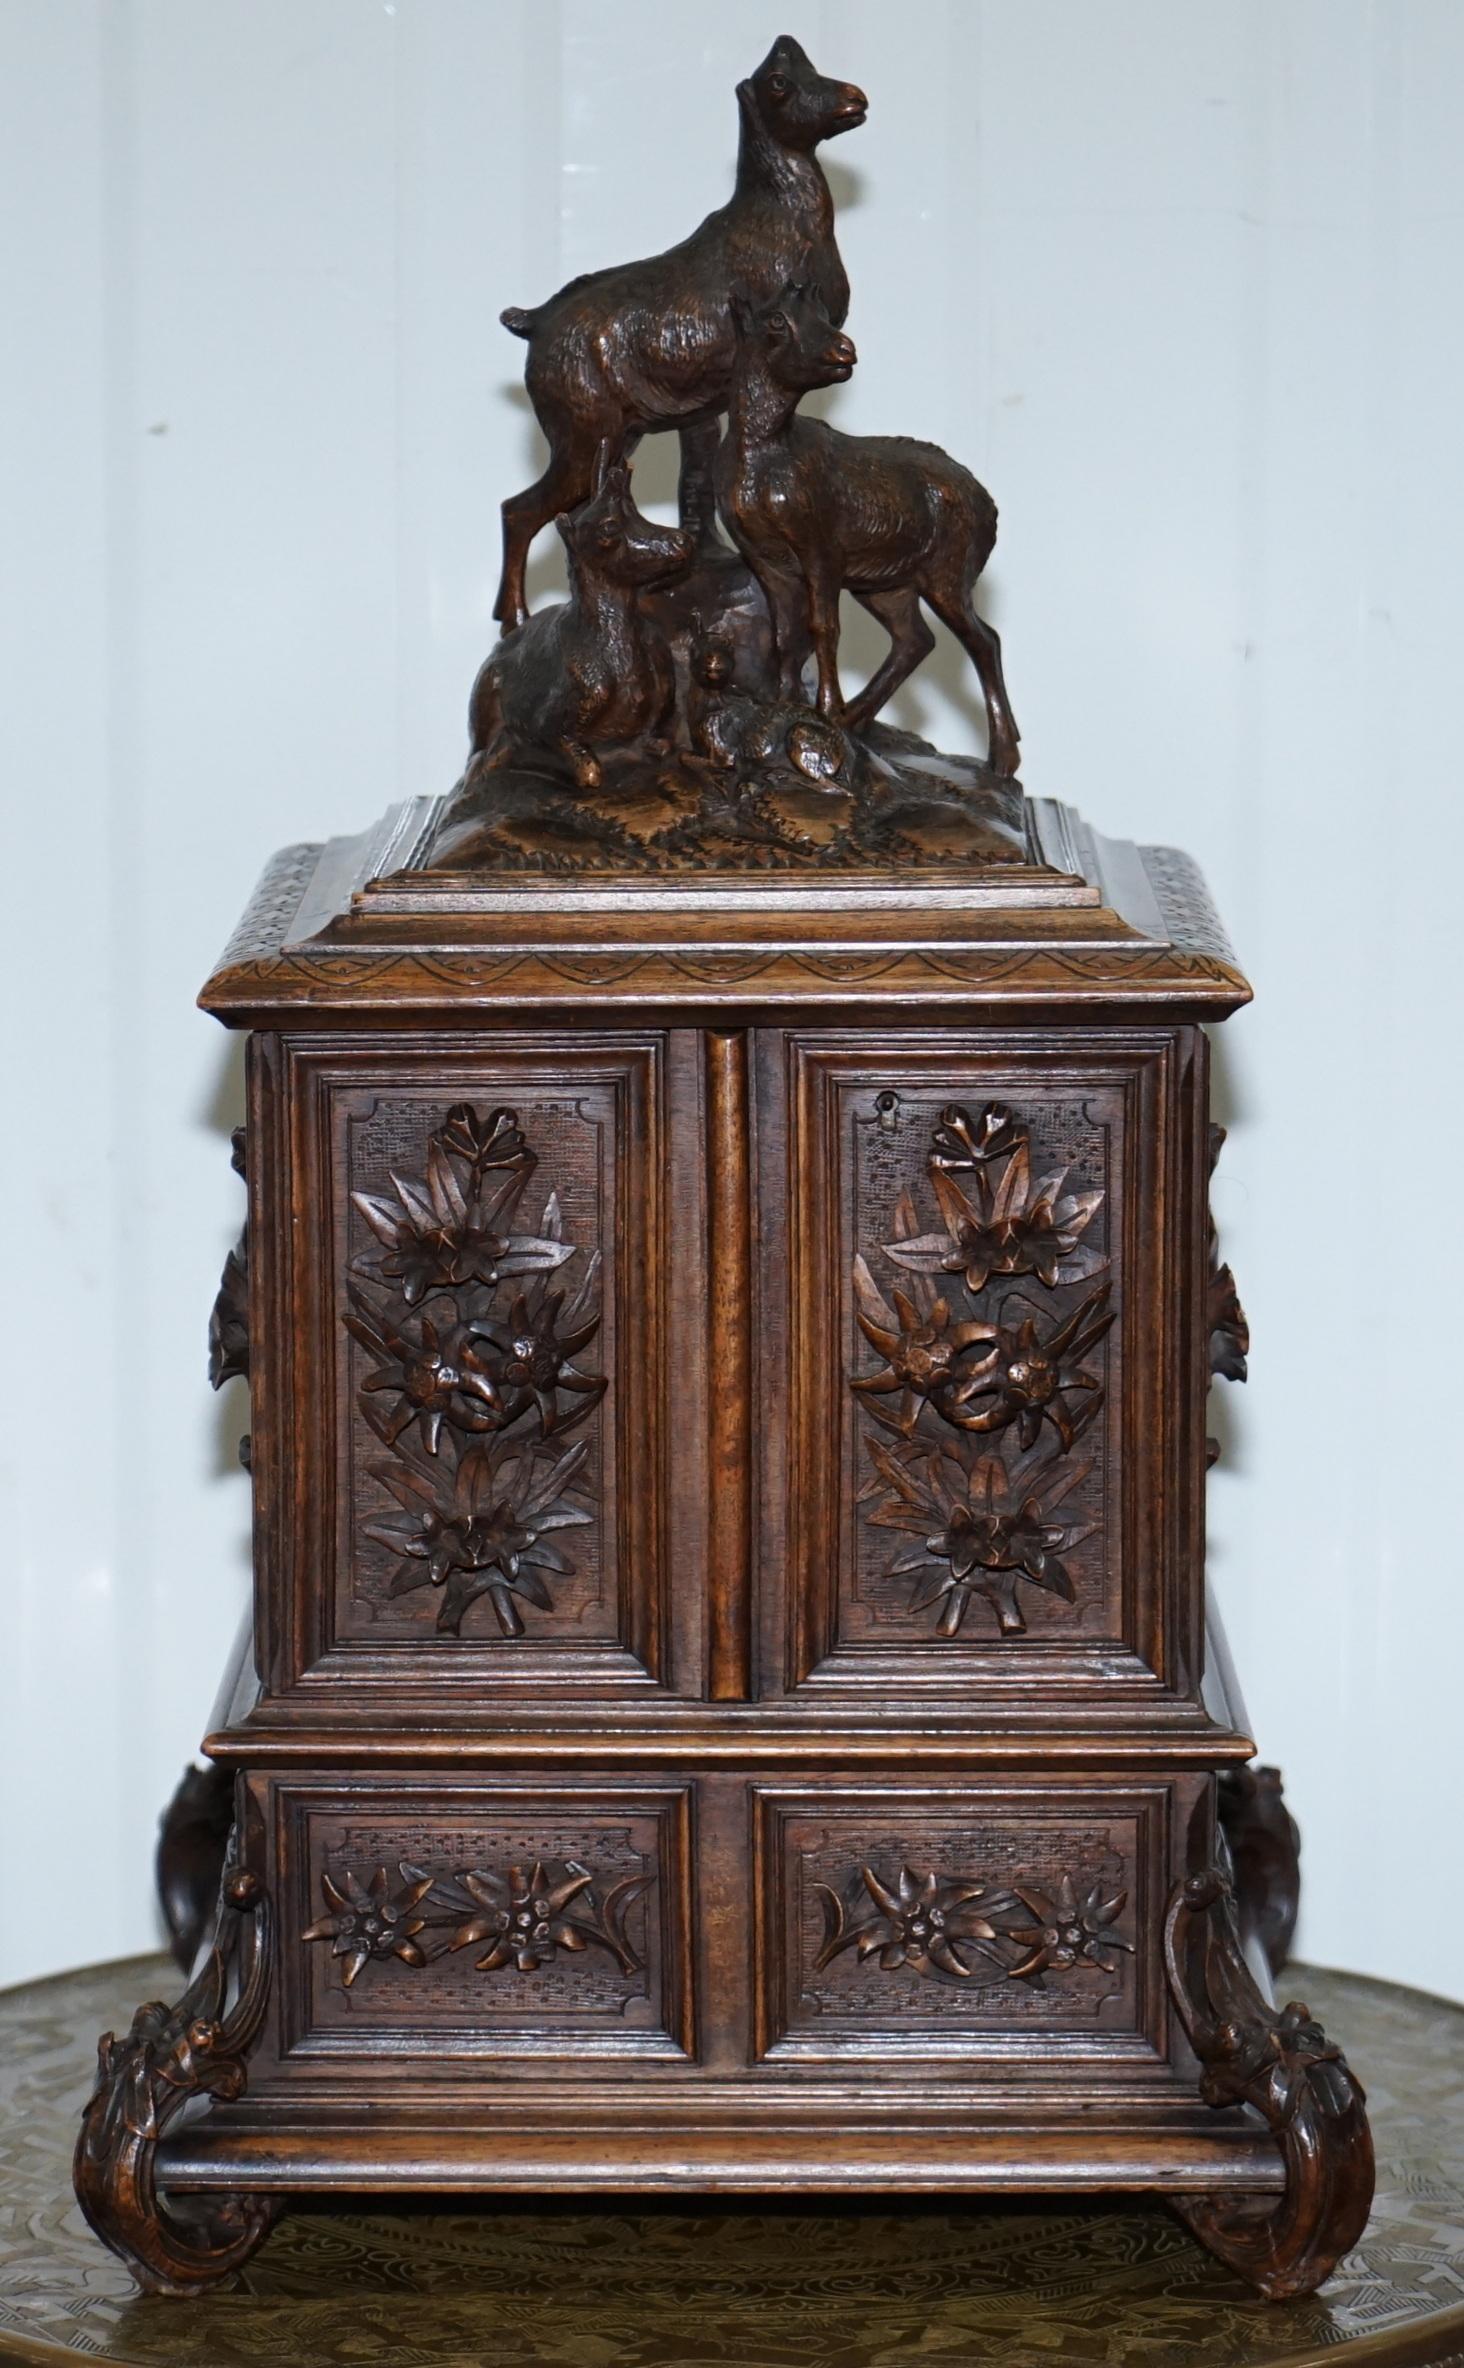 We are delighted to offer for auction this very rare original Black Forest wood hand carved large Jewellery box

There are multiple high definition super-sized pictures at the bottom of this page

A very grand and distinctive piece, the top